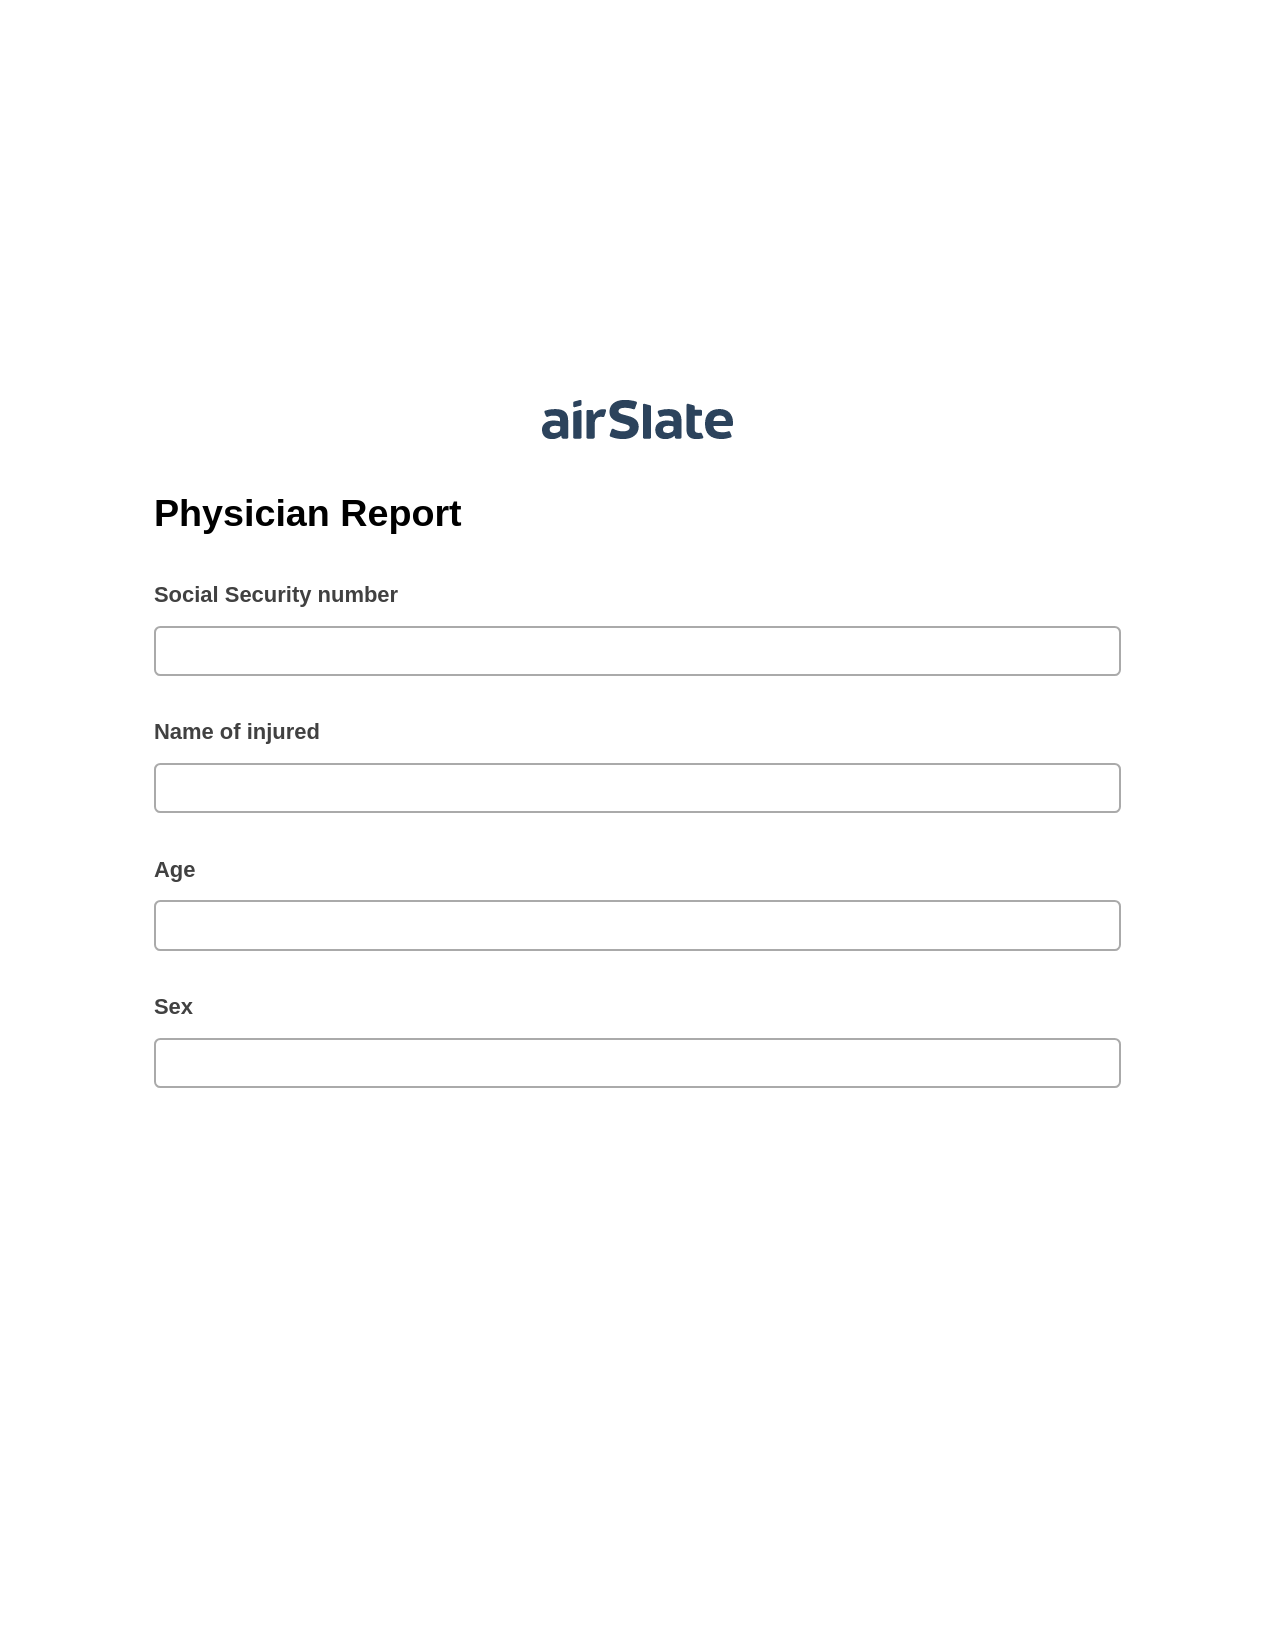 Physician Report Pre-fill from Salesforce Records Bot, Invoke Salesforce Process Bot, Archive to SharePoint Folder Bot